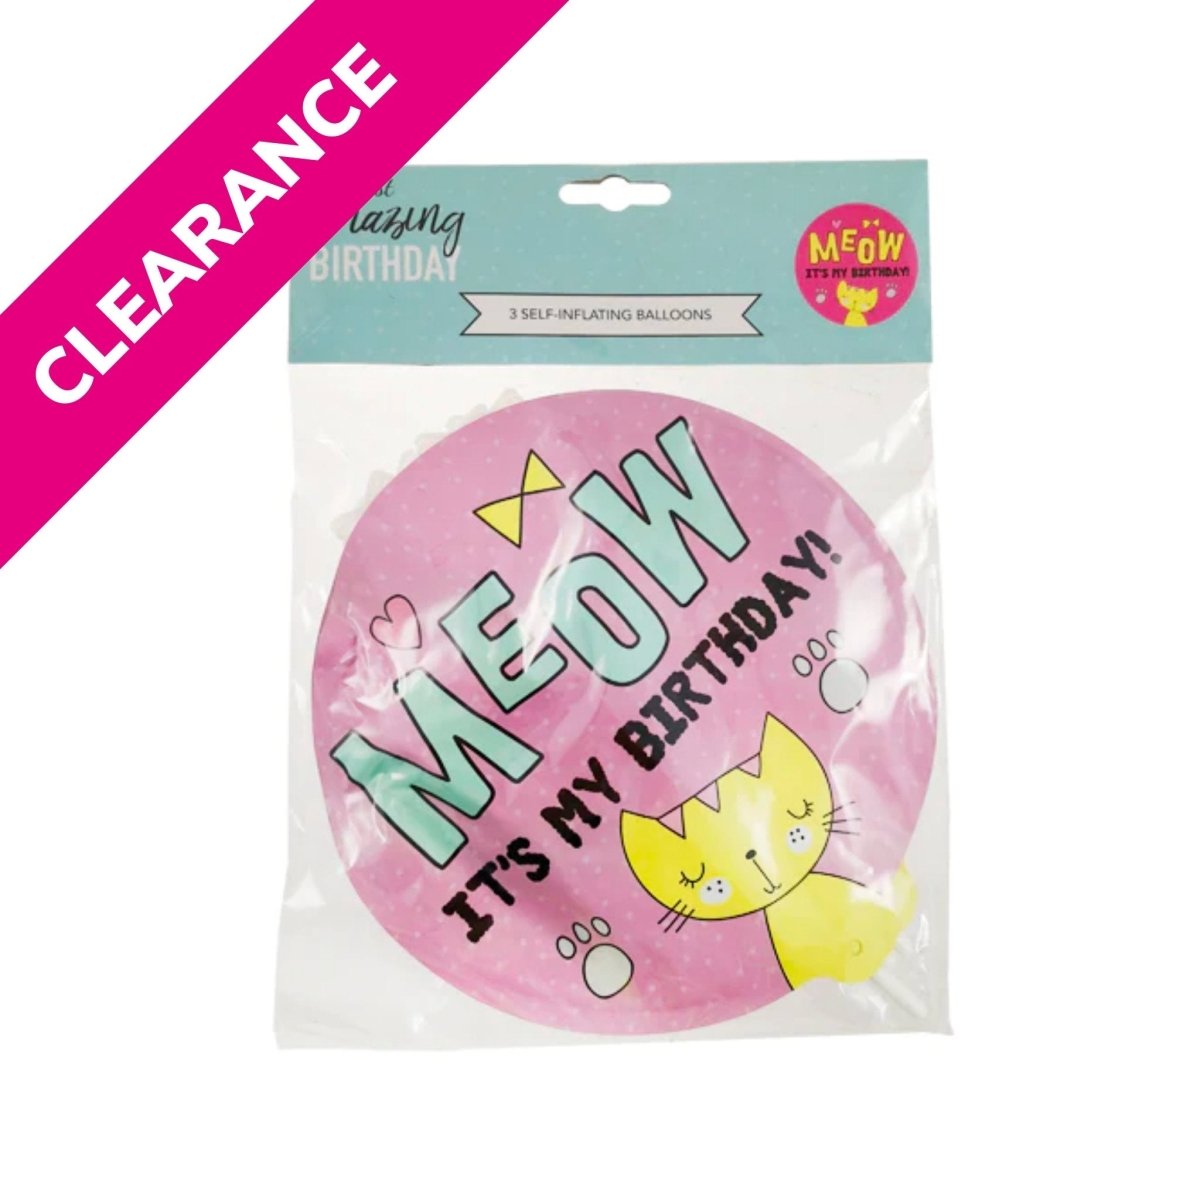 Meow Party Self Inflating Balloons 3pk - Kids Party Craft